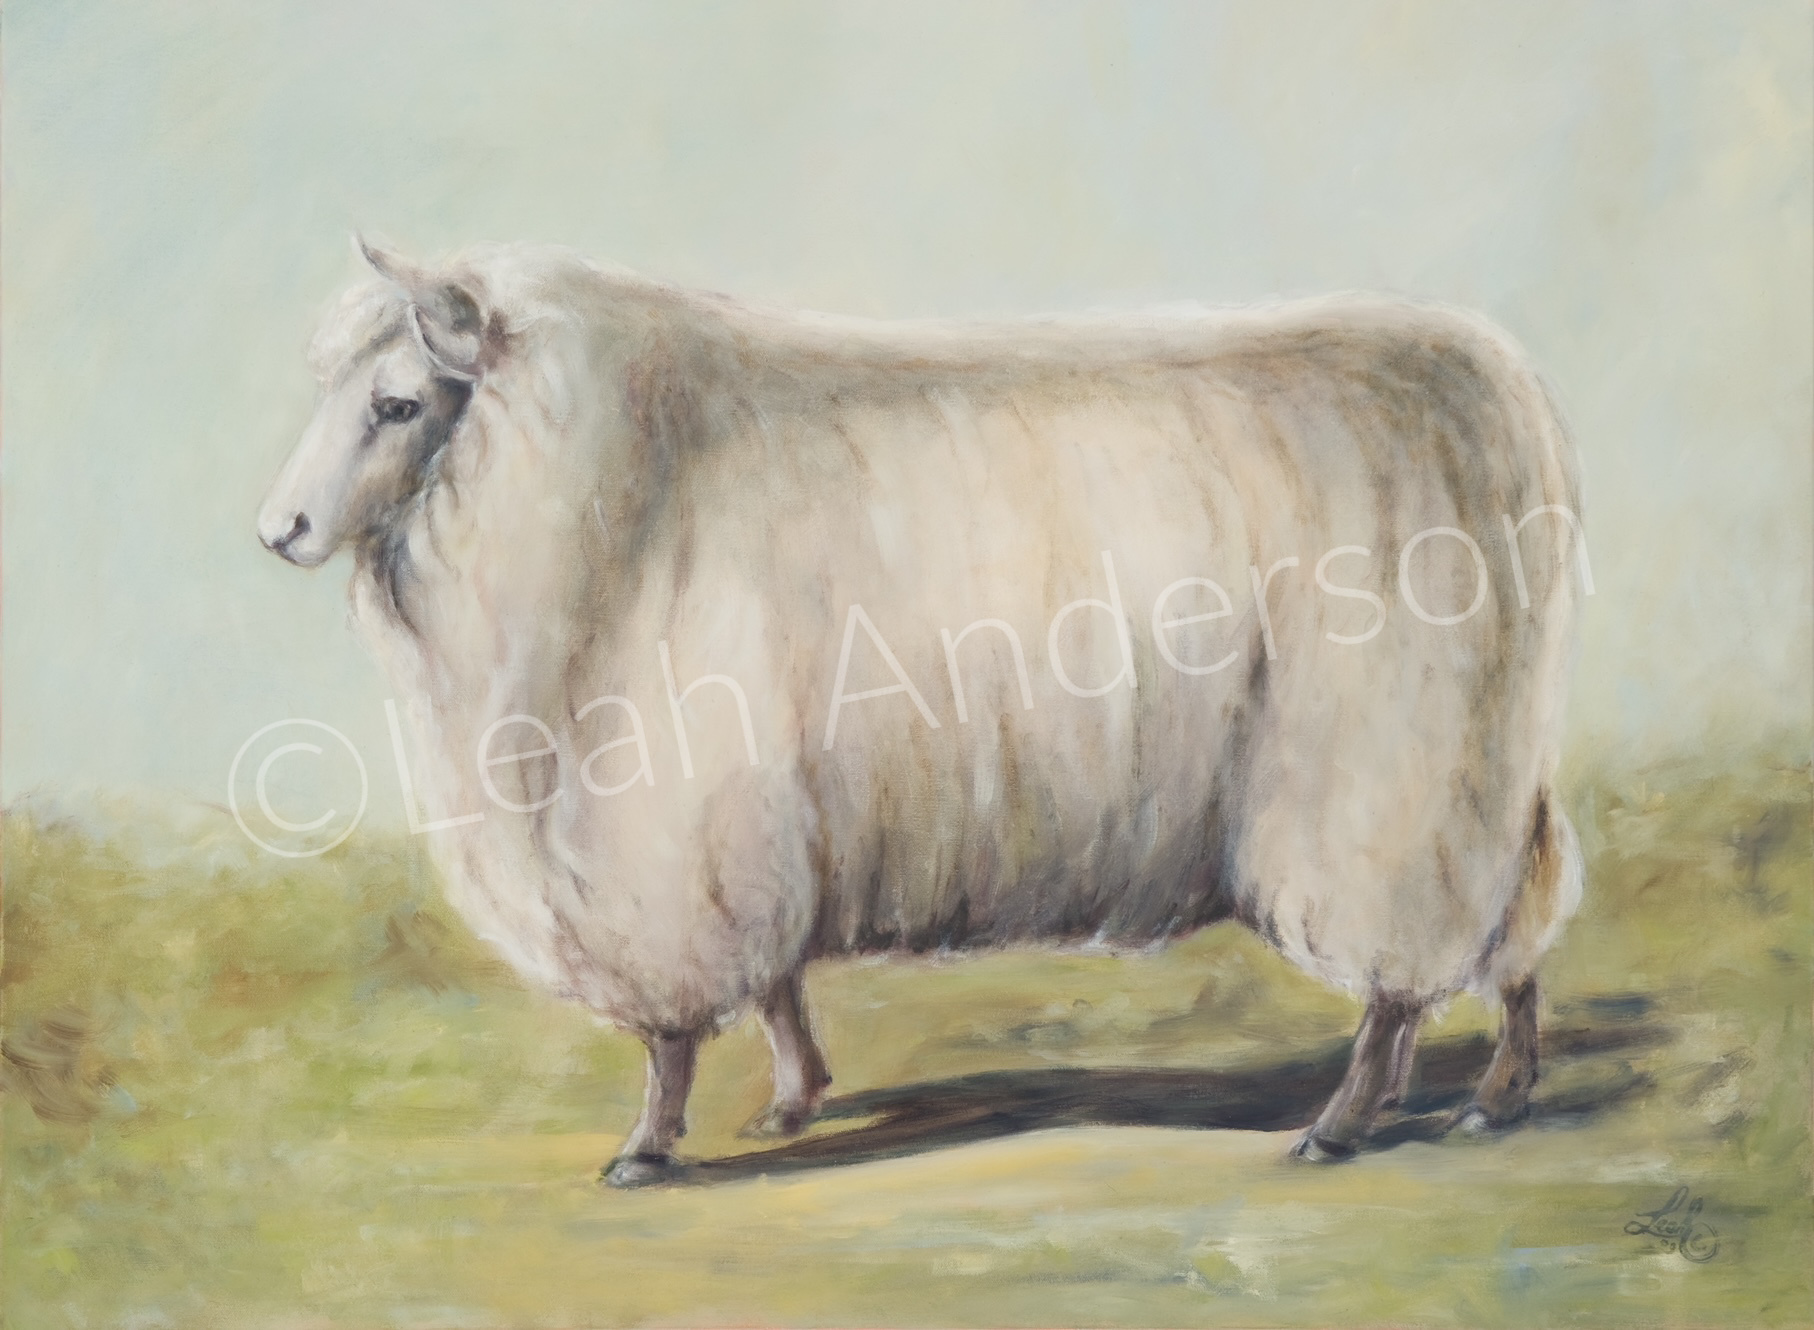 Lone sheep painting by Leah Anderson.